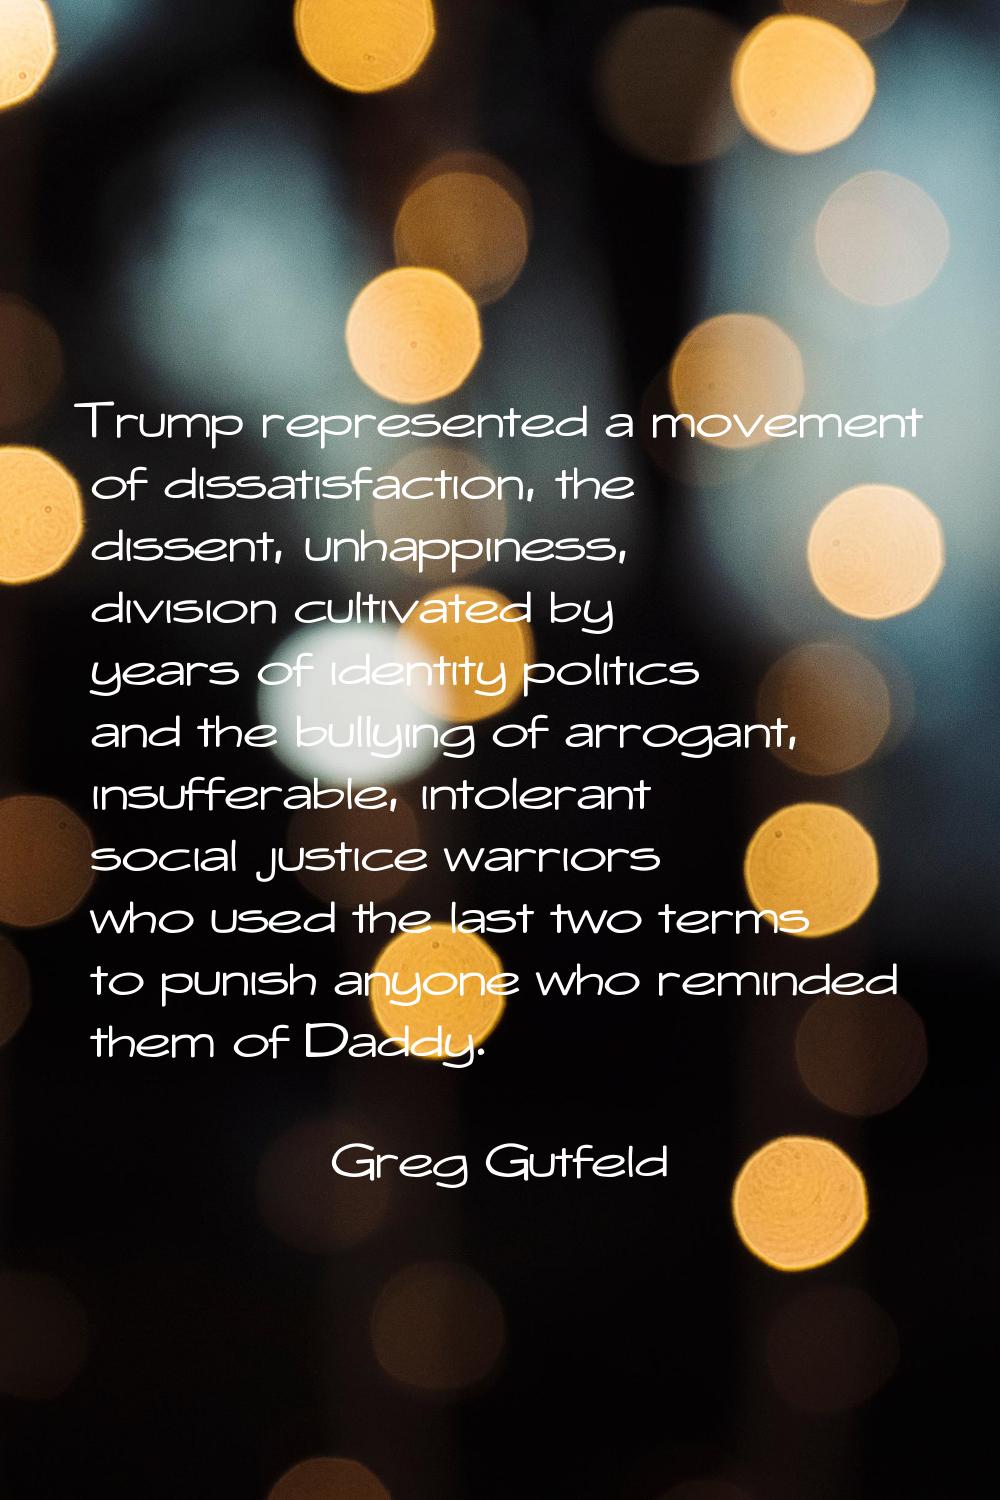 Trump represented a movement of dissatisfaction, the dissent, unhappiness, division cultivated by y